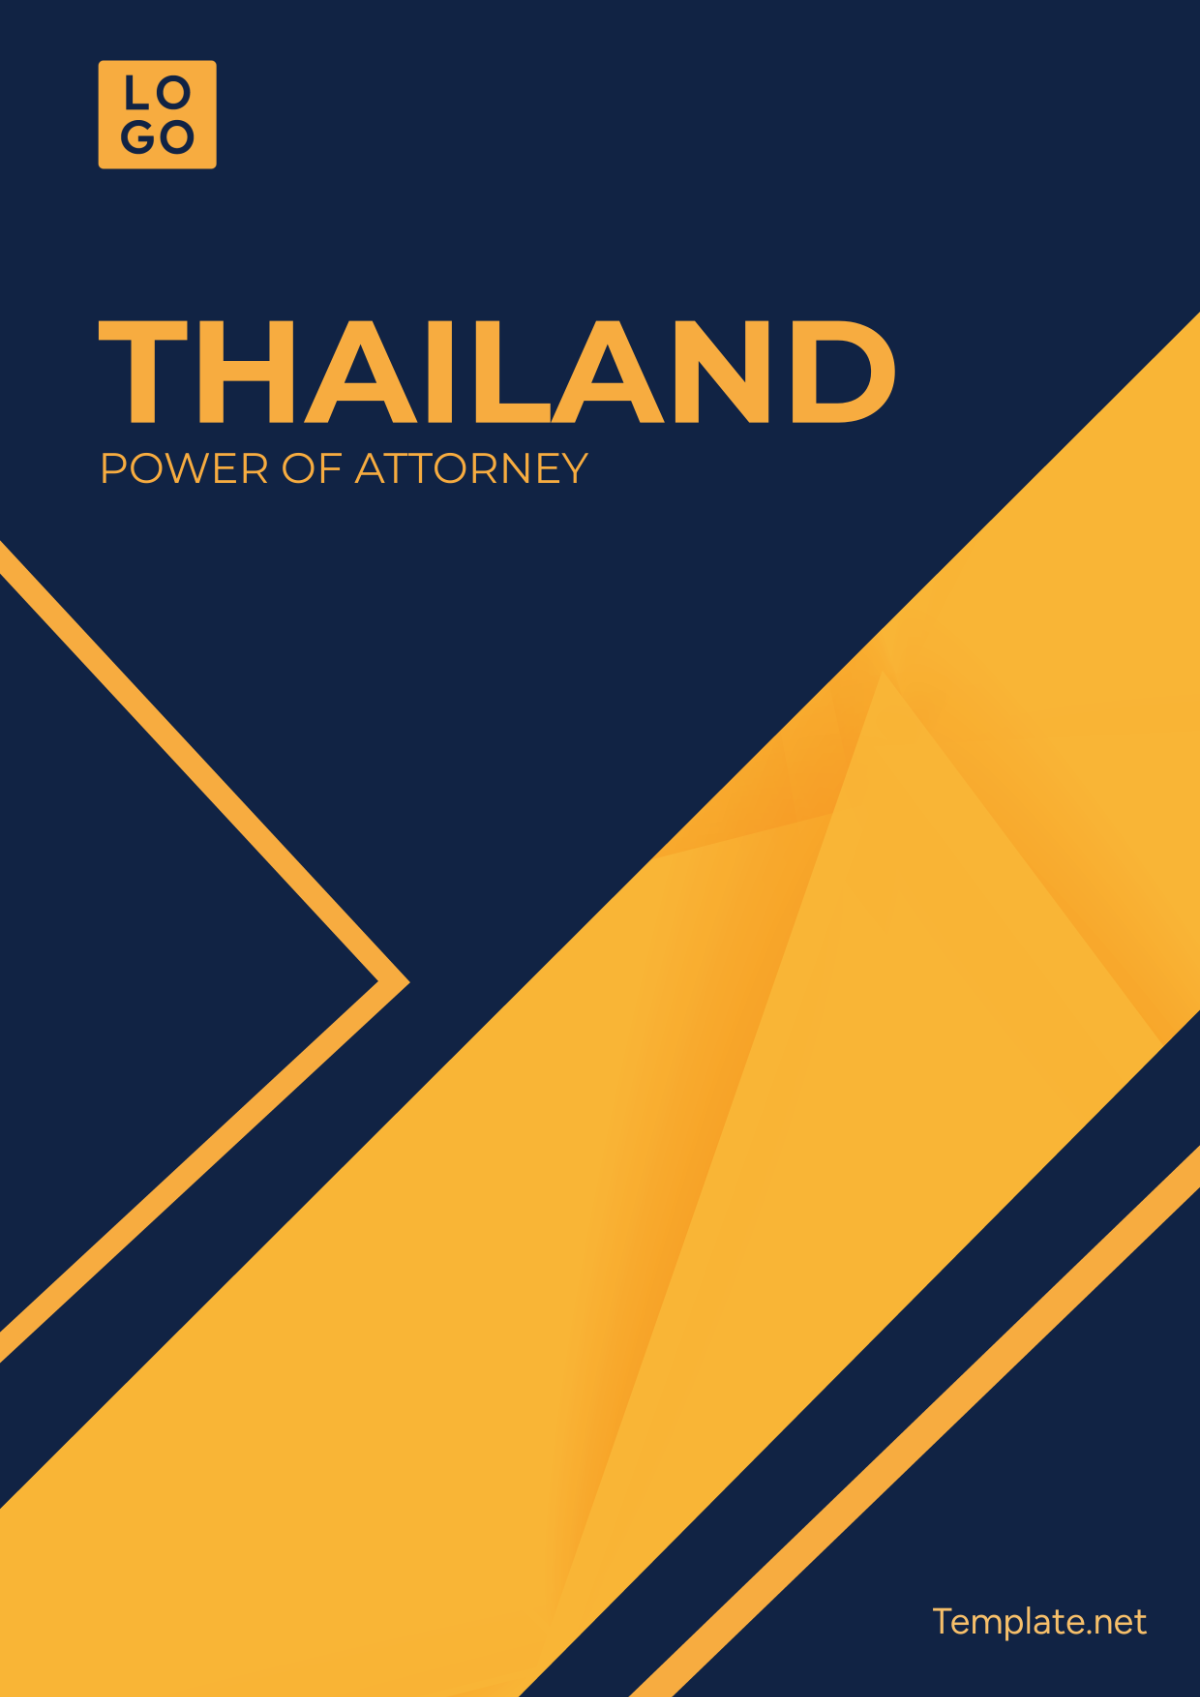 Thailand Power of Attorney Template